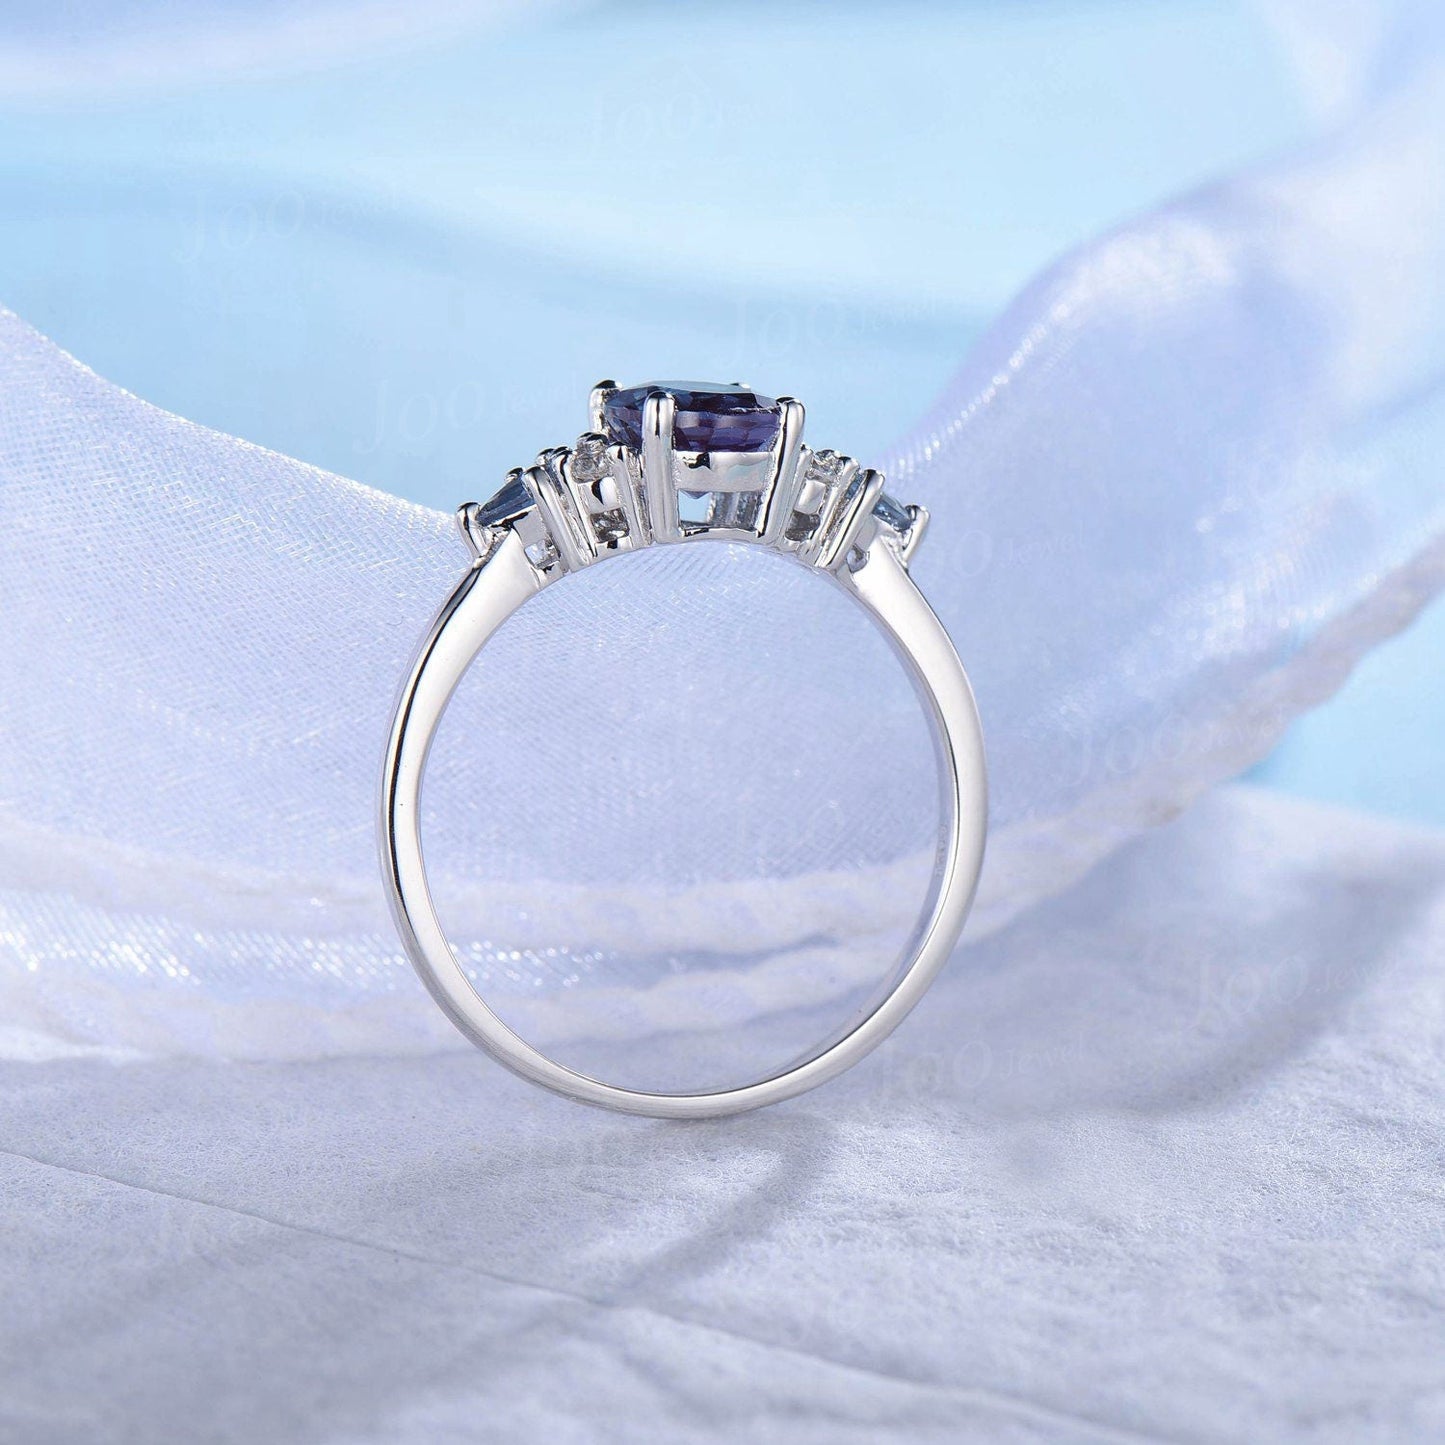 1.5ct Oval Color-Change Alexandrite Engagement Rings 14K White Gold Black Spinel Kite Alexandrite Ring Unique June Birthstone Birthday Gifts